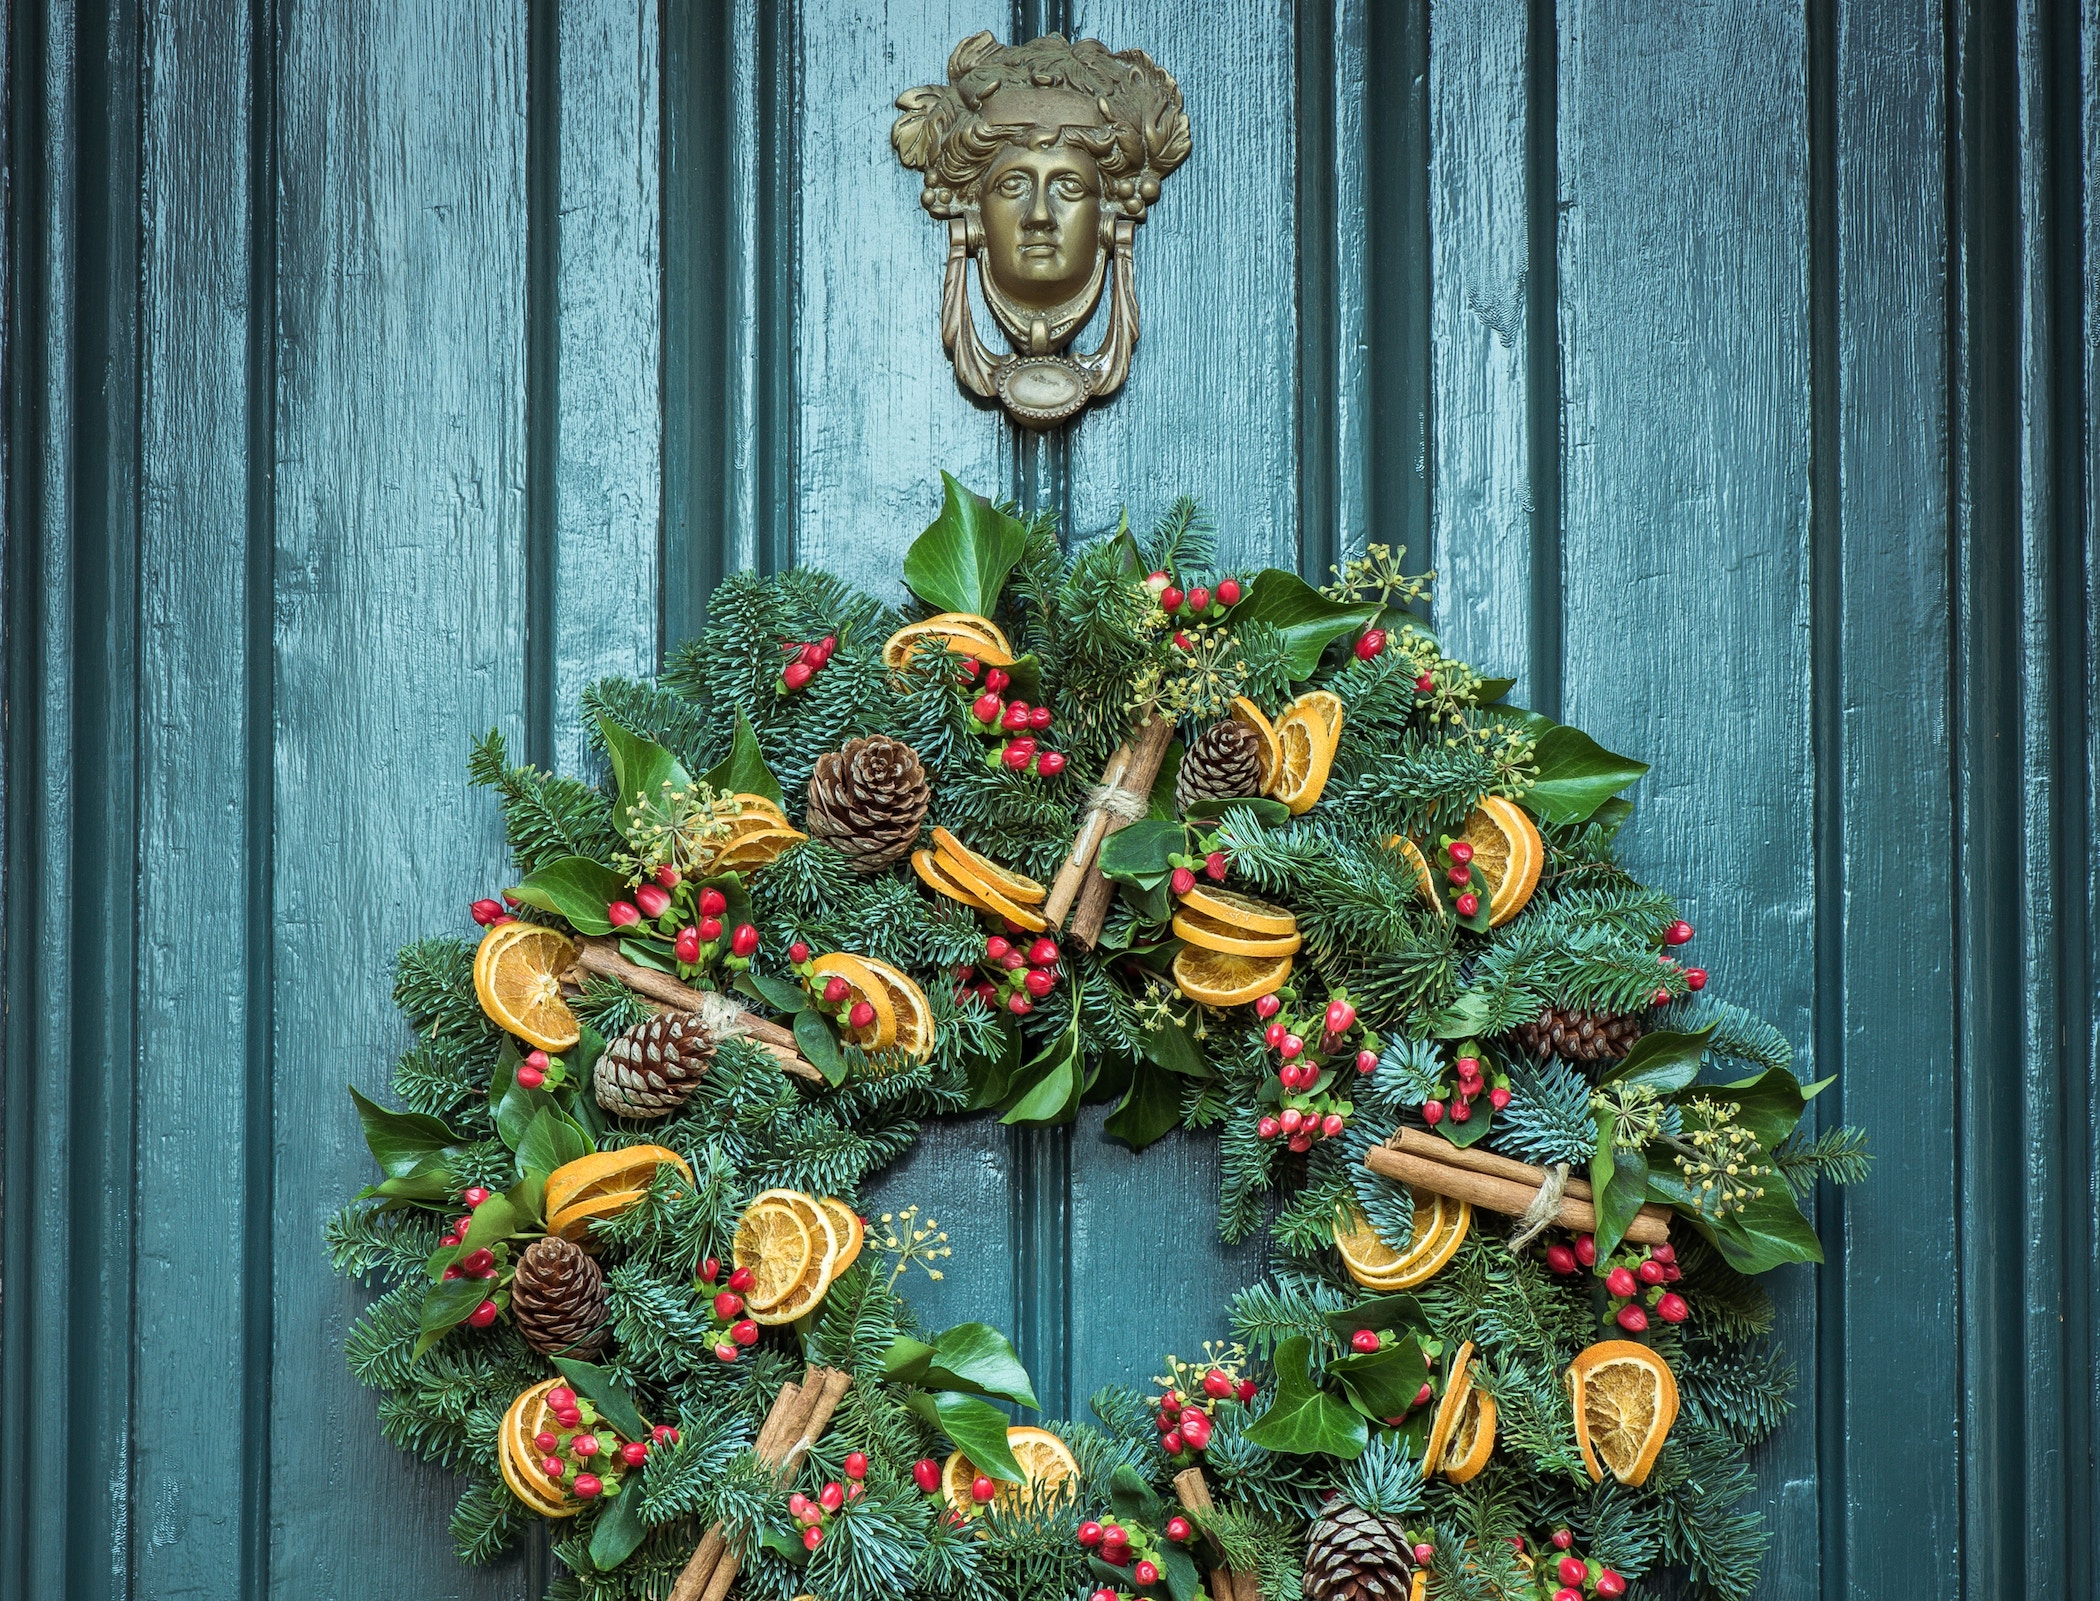 Housing forecast for 2019_housing experts weigh in_image: front door with wreath